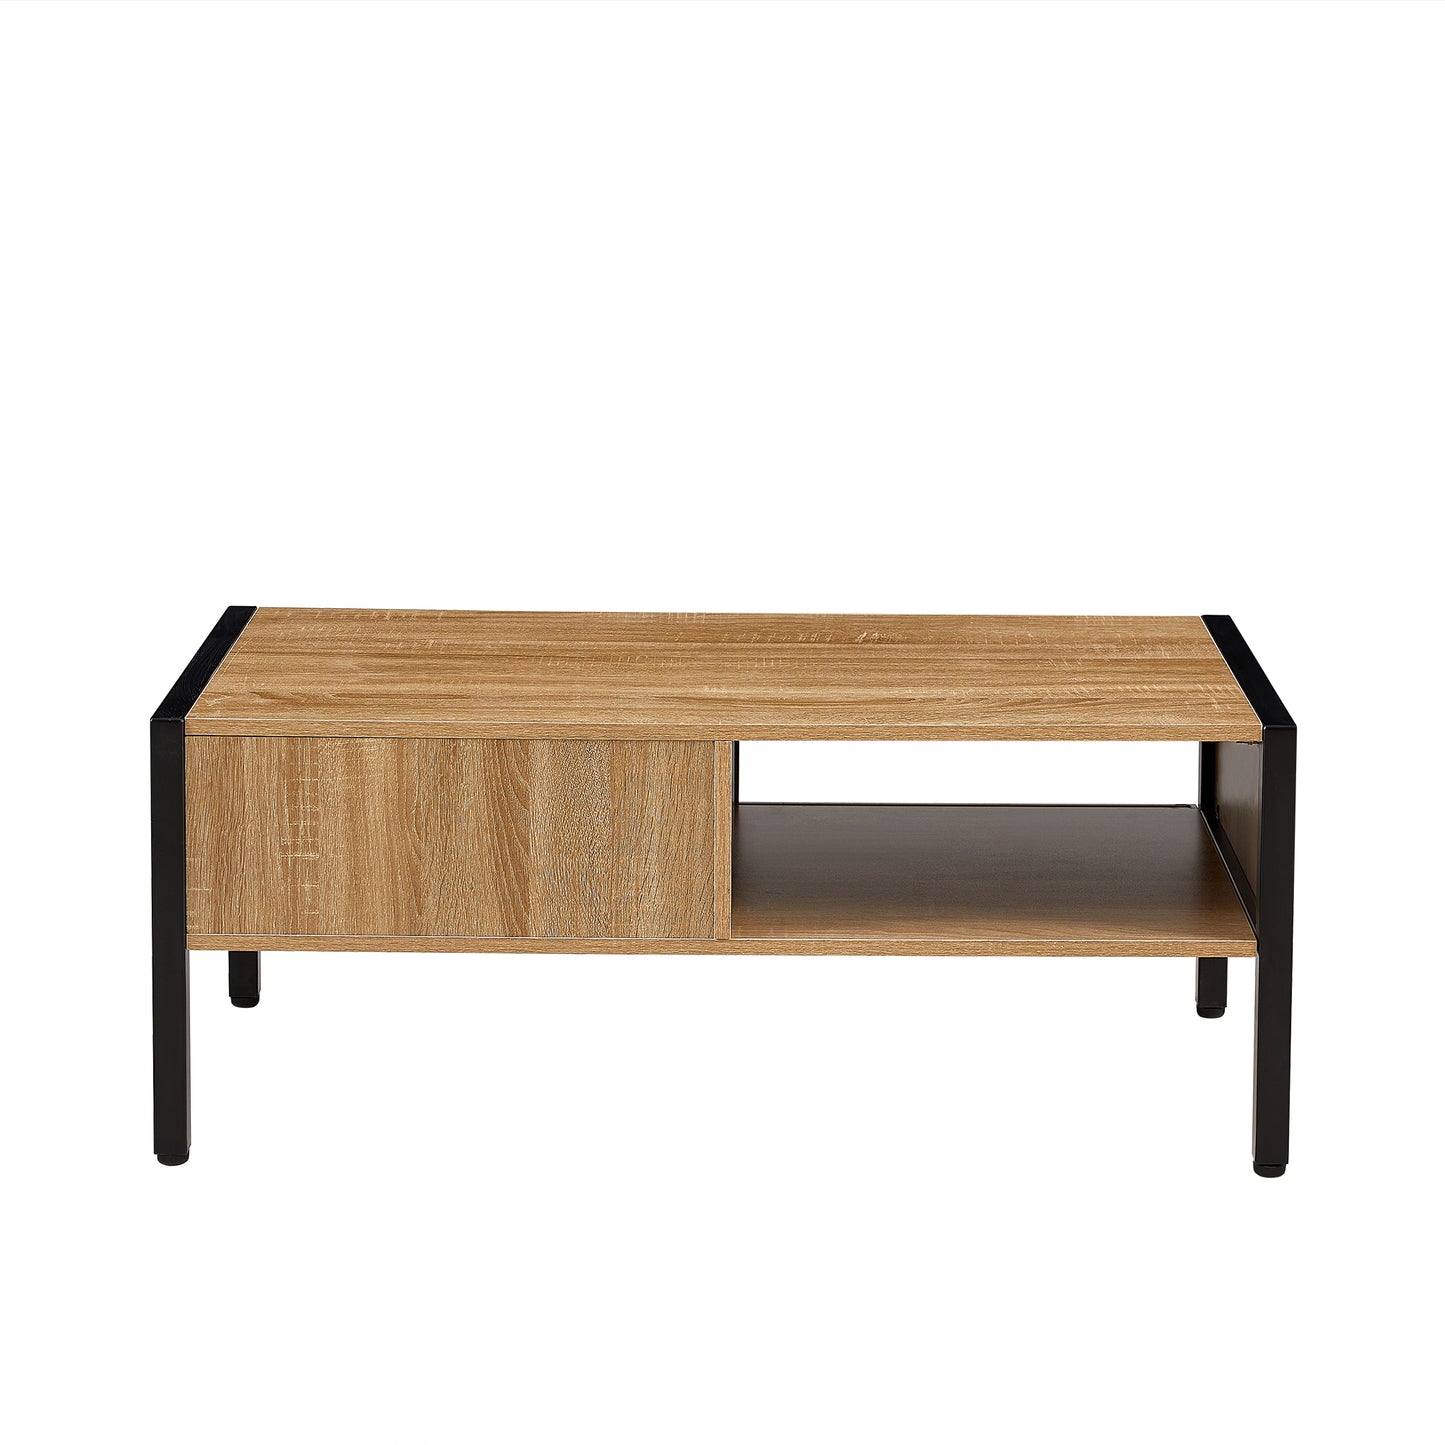 Rattan Coffee Table with Sliding Door Storage and Metal Legs for Modern Living Room